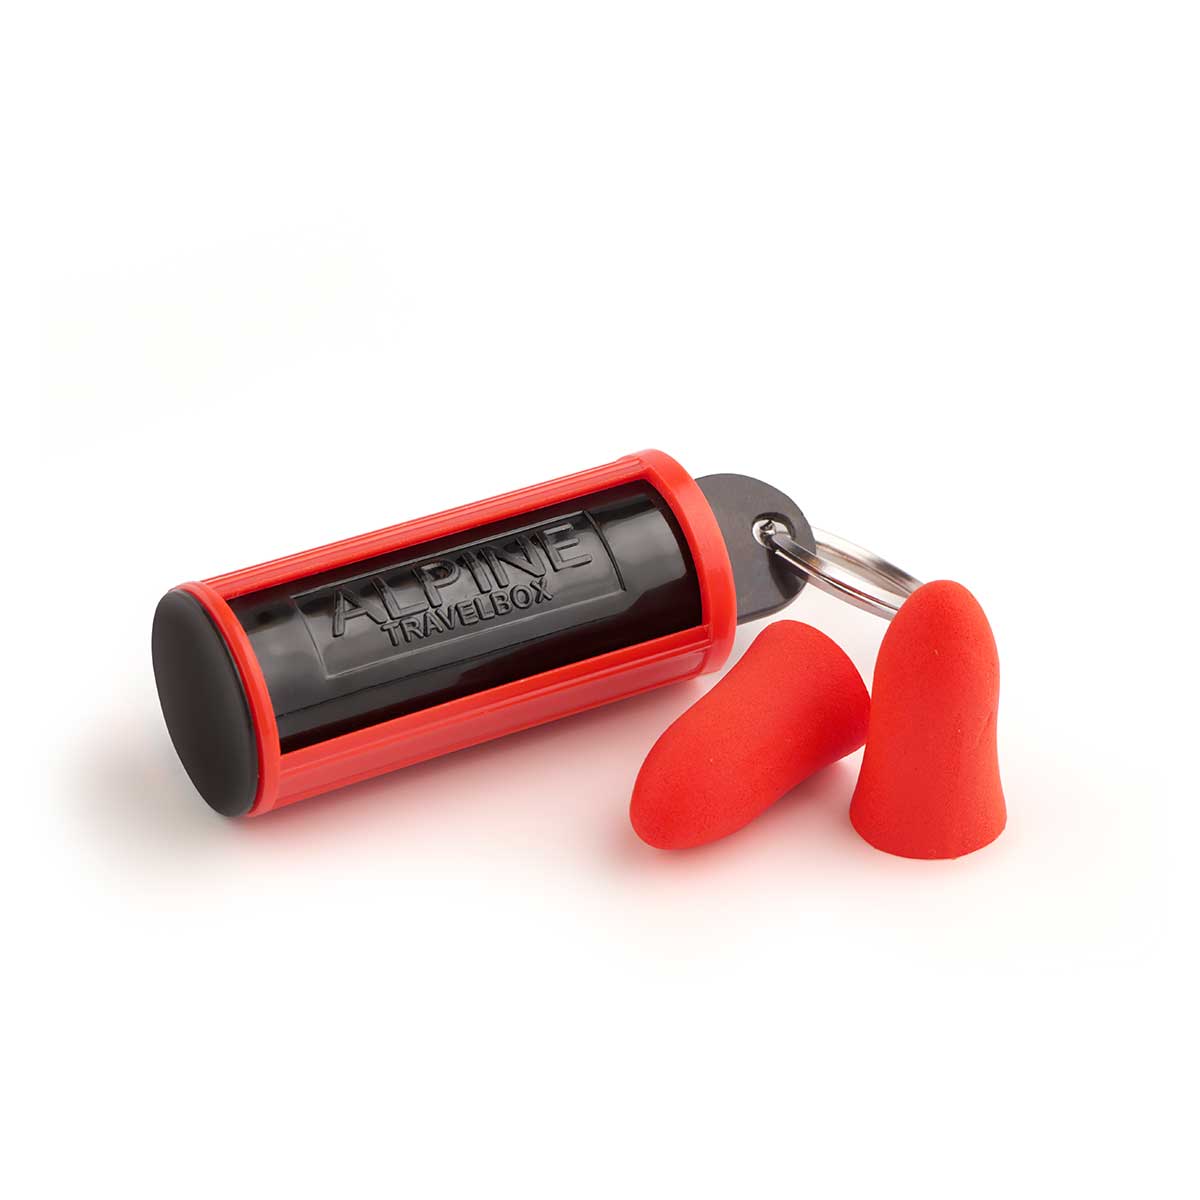 Plug-and-Go-earplugs-container-closed-alpine-hearing-protection